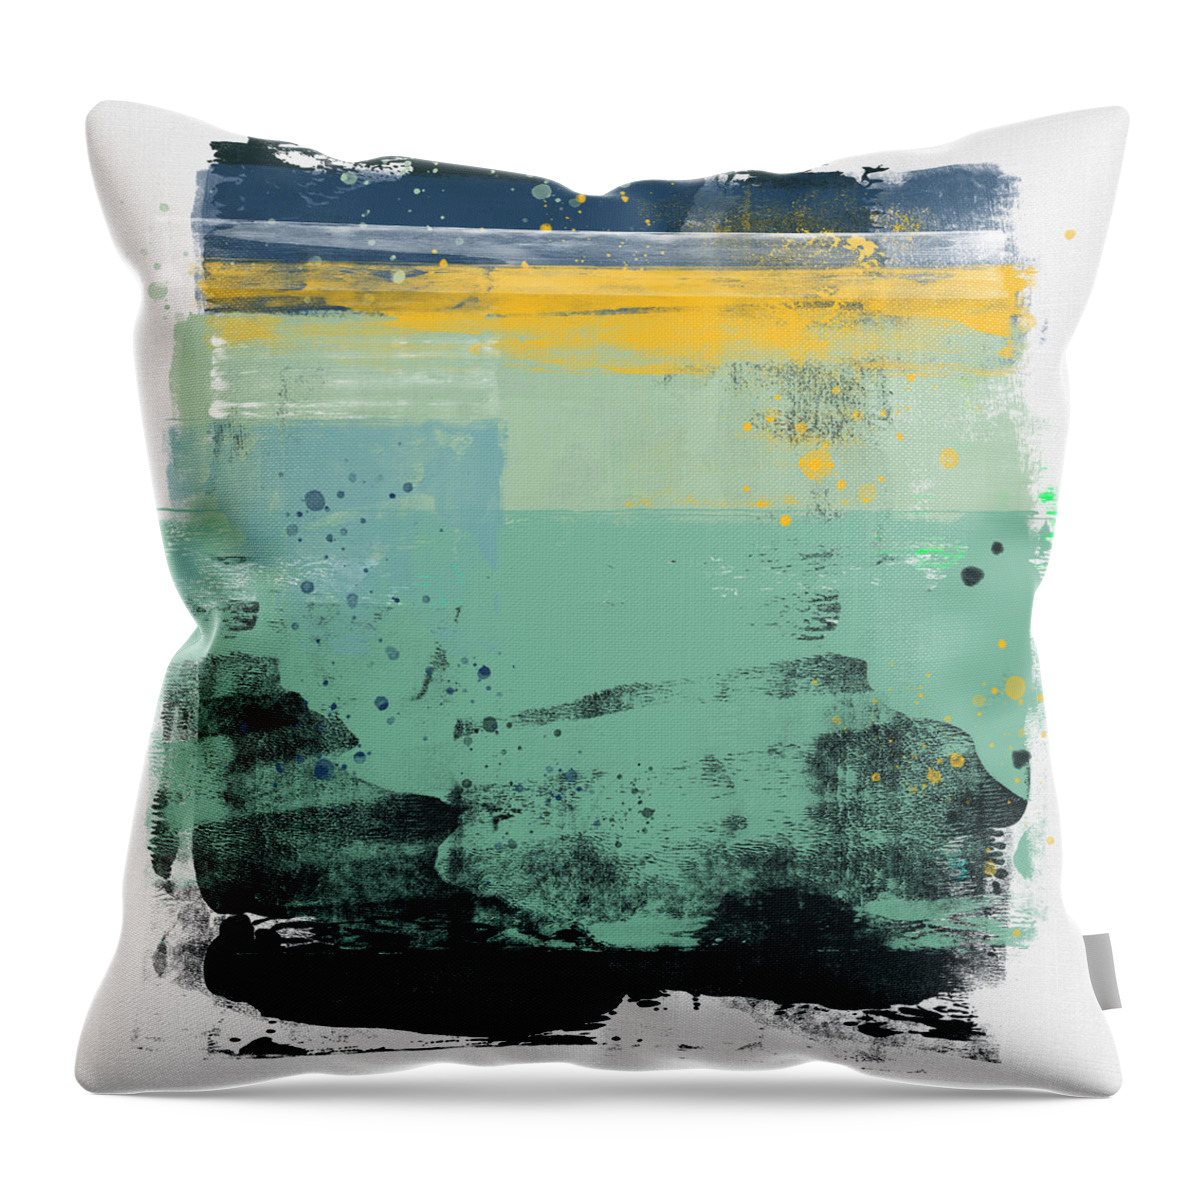 Abstract Throw Pillow featuring the painting Abstract Sage Green and Yellow Study by Naxart Studio